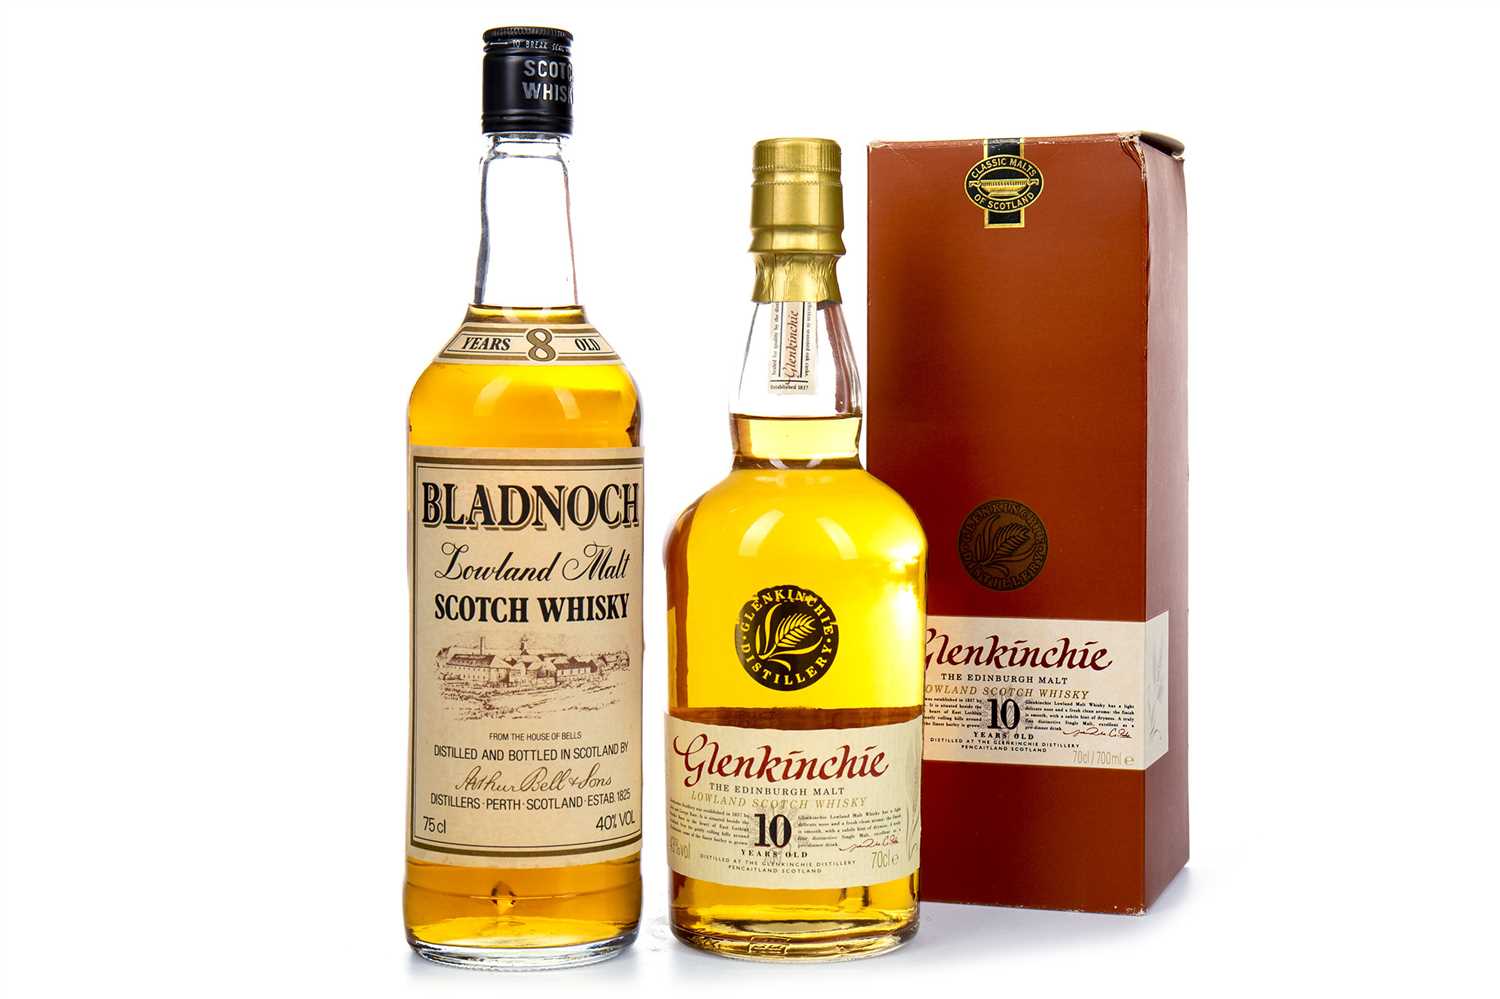 Lot 311 - BLADNOCH 8 YEARS OLD AND GLENKINCHIE 10 YEARS OLD